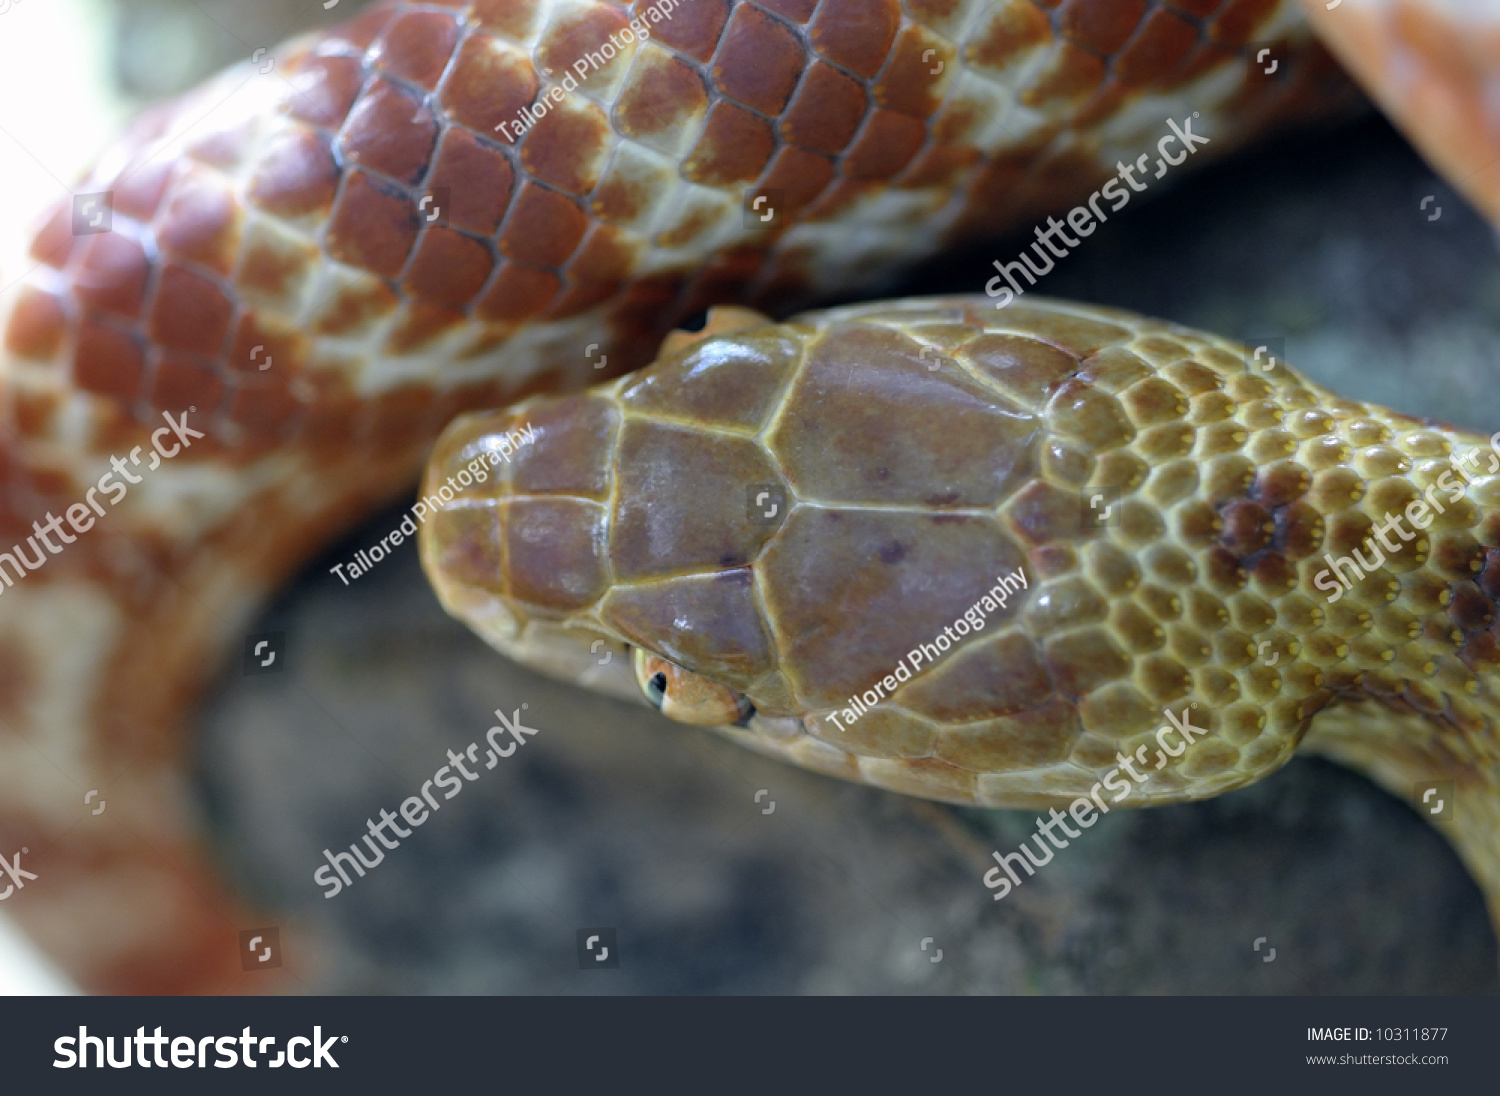 stock-photo-brown-tree-snake-head-from-above-10311877.jpg